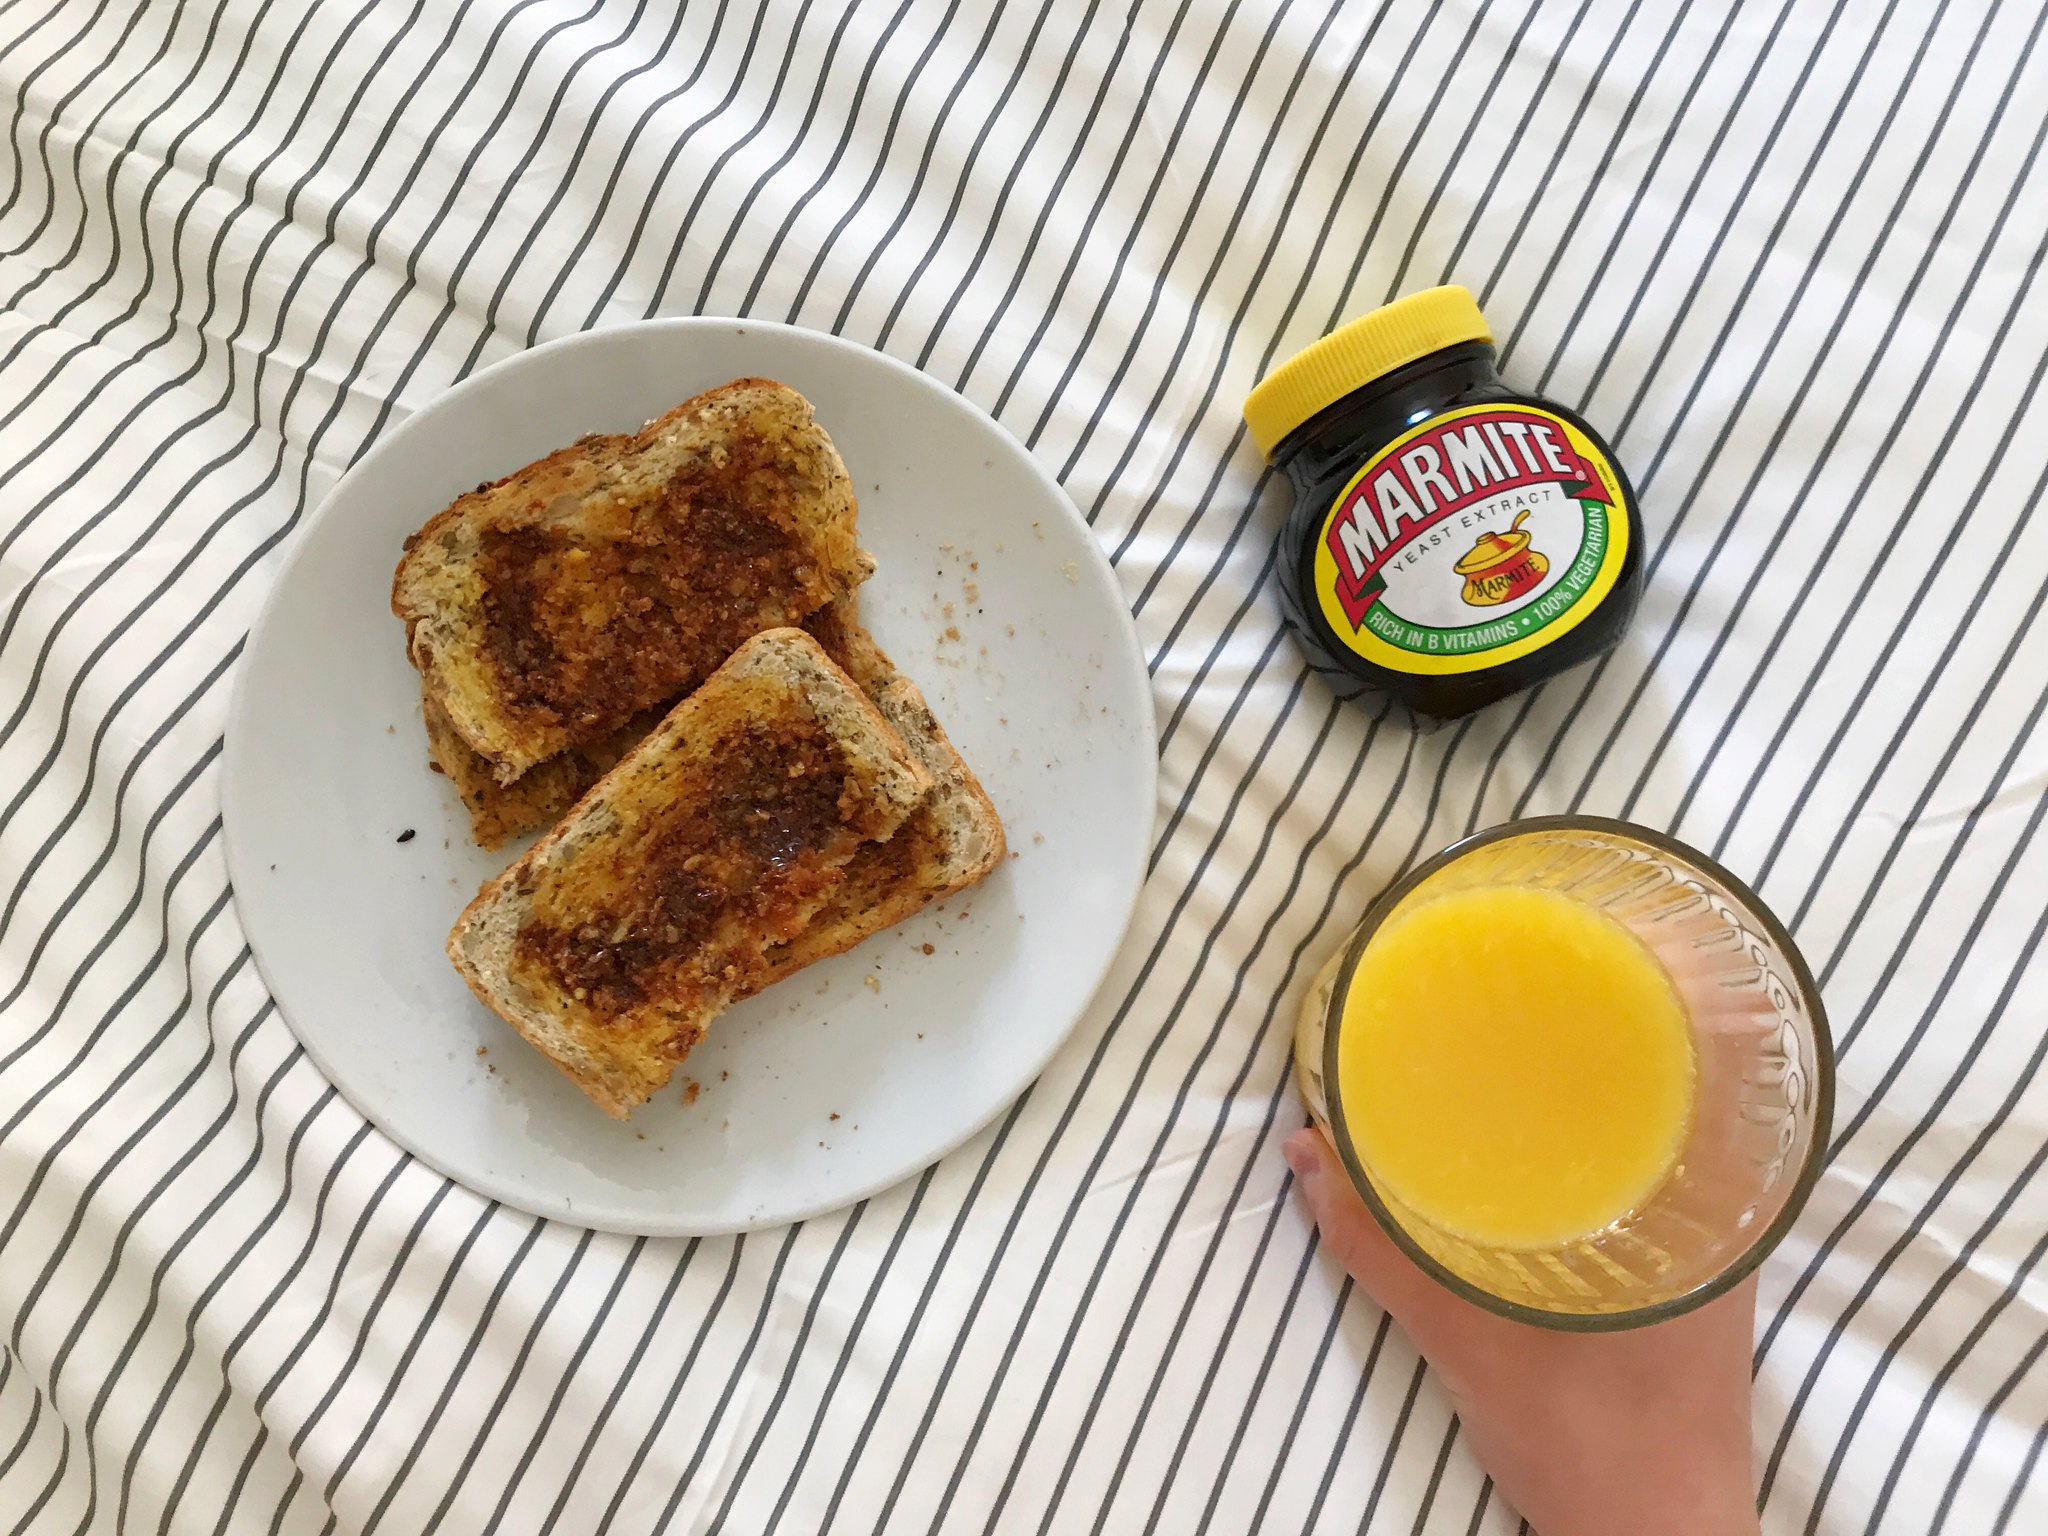 Marmite on toast - buying from companies with unethical parent companies